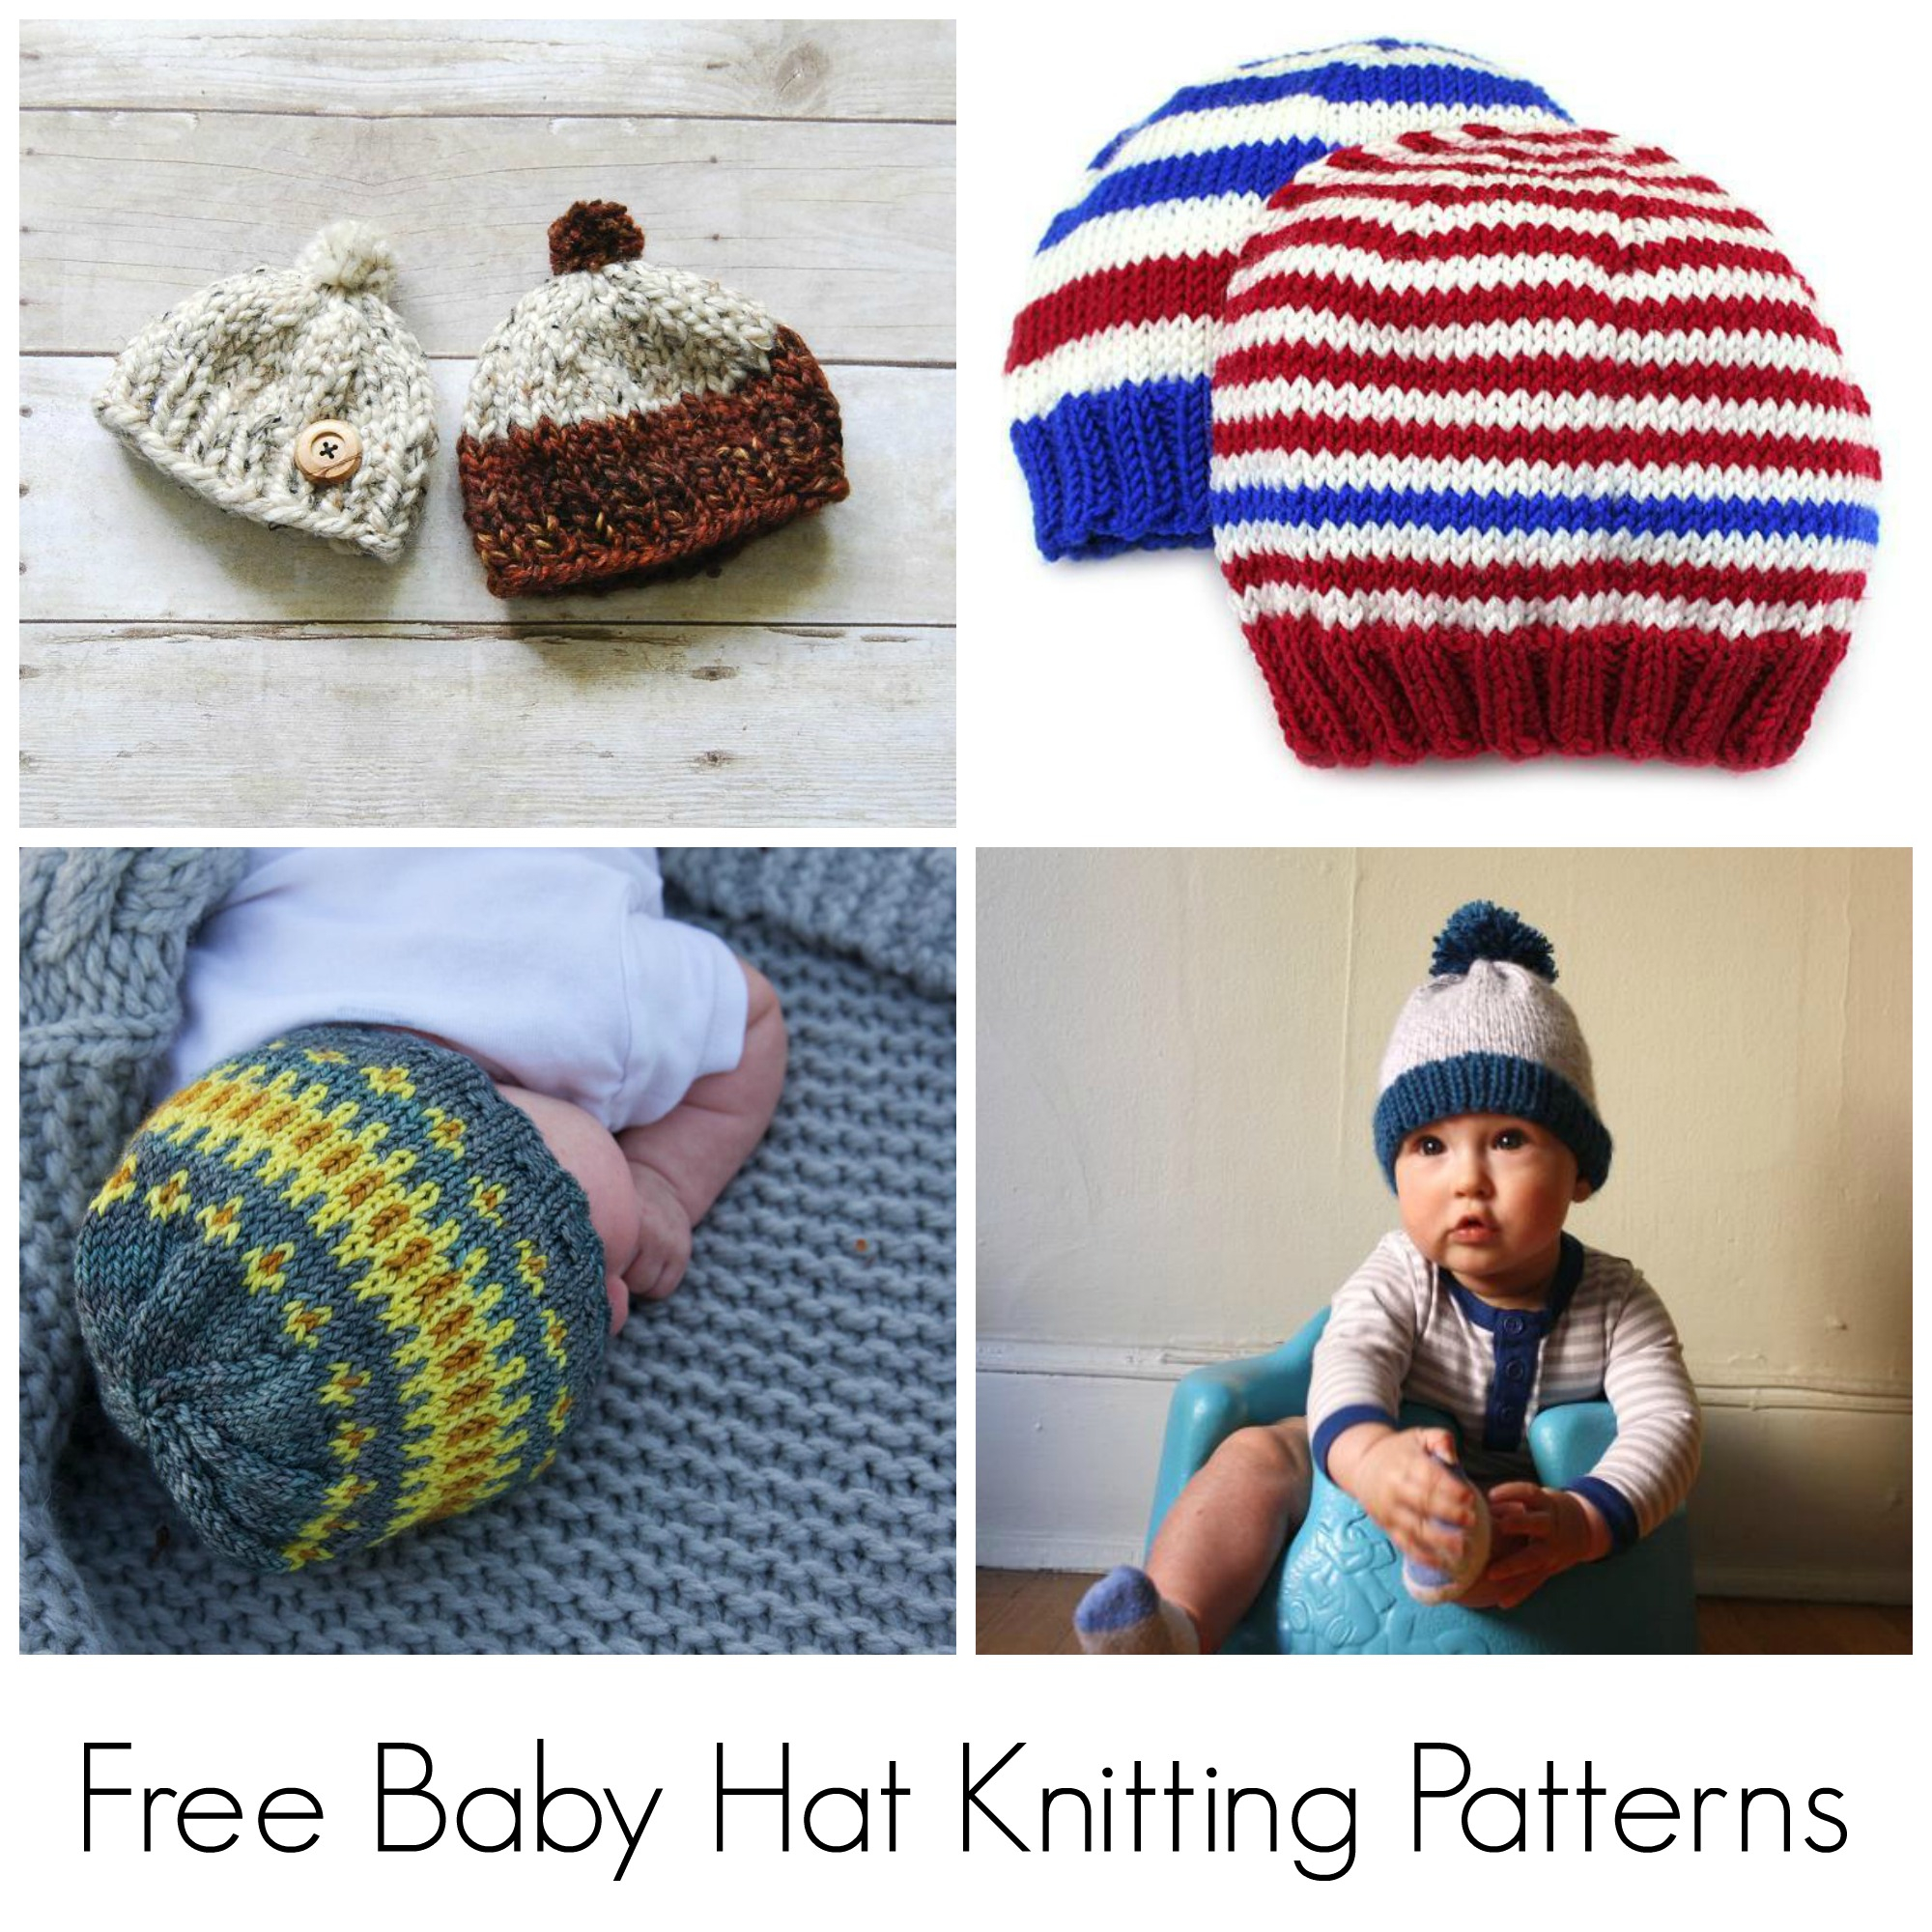 Baby Hat Patterns To Knit 10 Free Knitting Patterns For Ba Hats On Craftsy